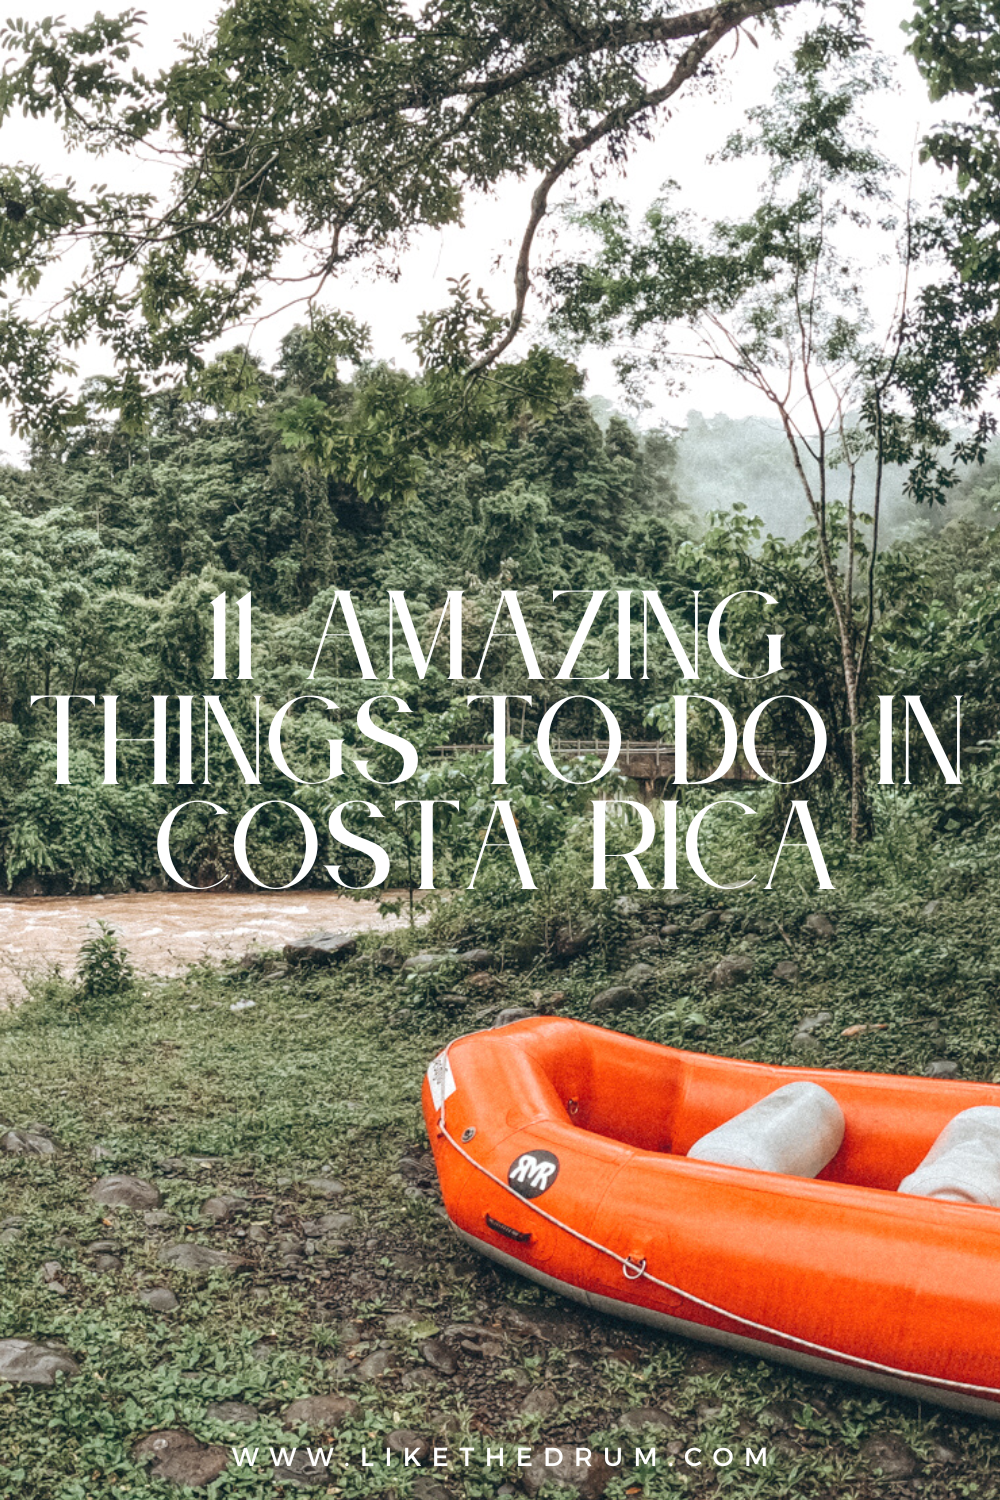 11 amazing things to do in costa rica - pinterest pin